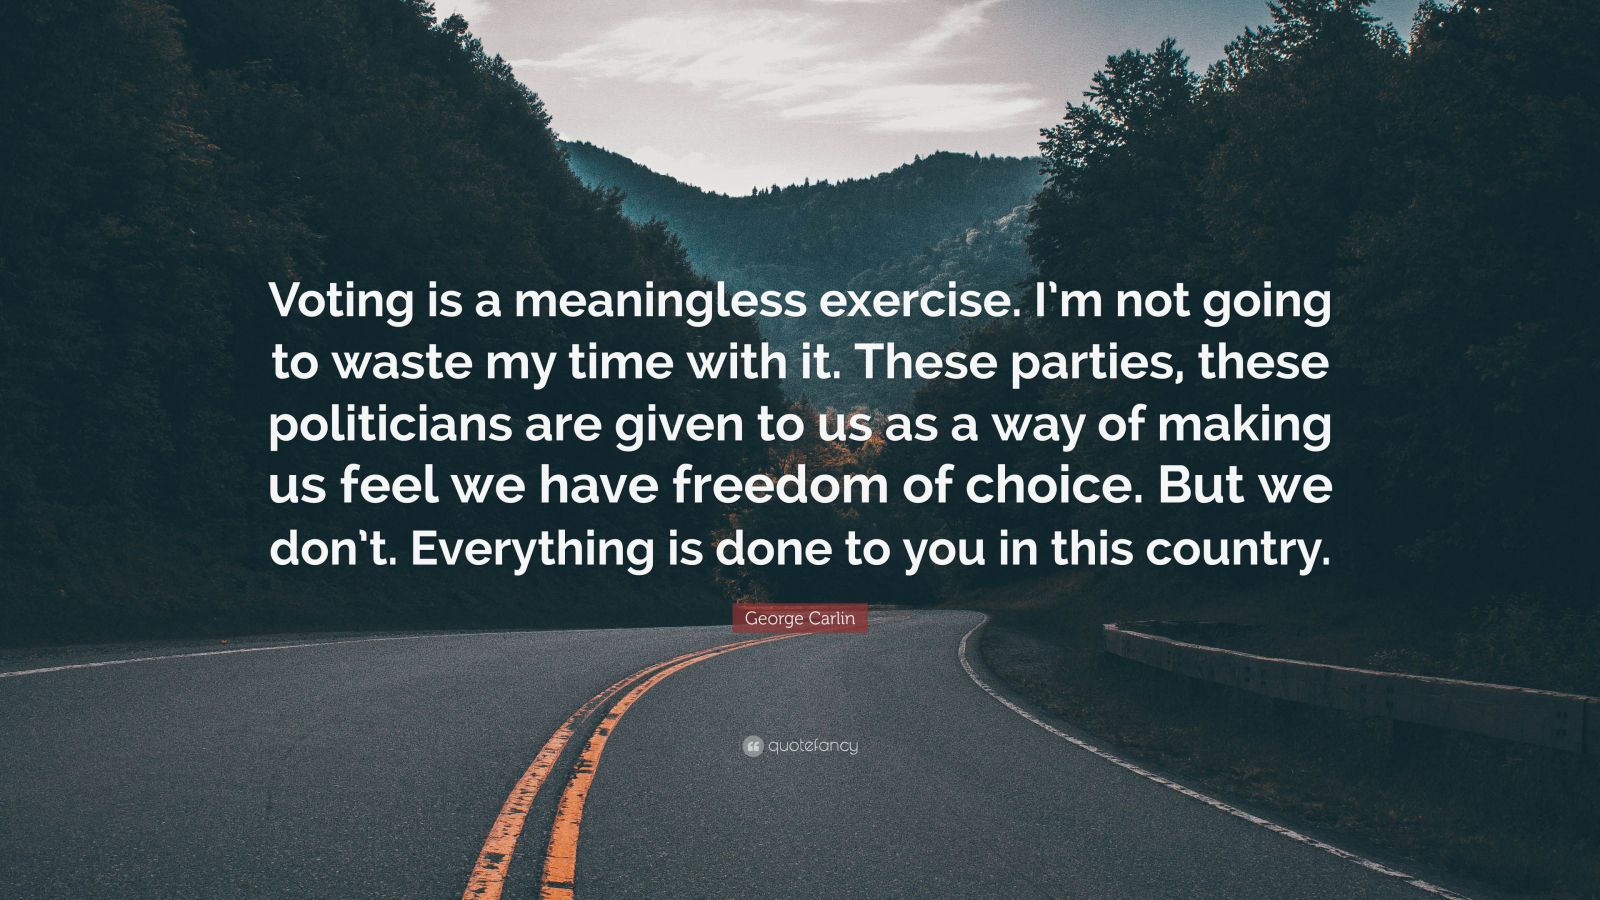 5352382-George-Carlin-Quote-Voting-is-a-meaningless-exercise-I-m-not-going.jpg